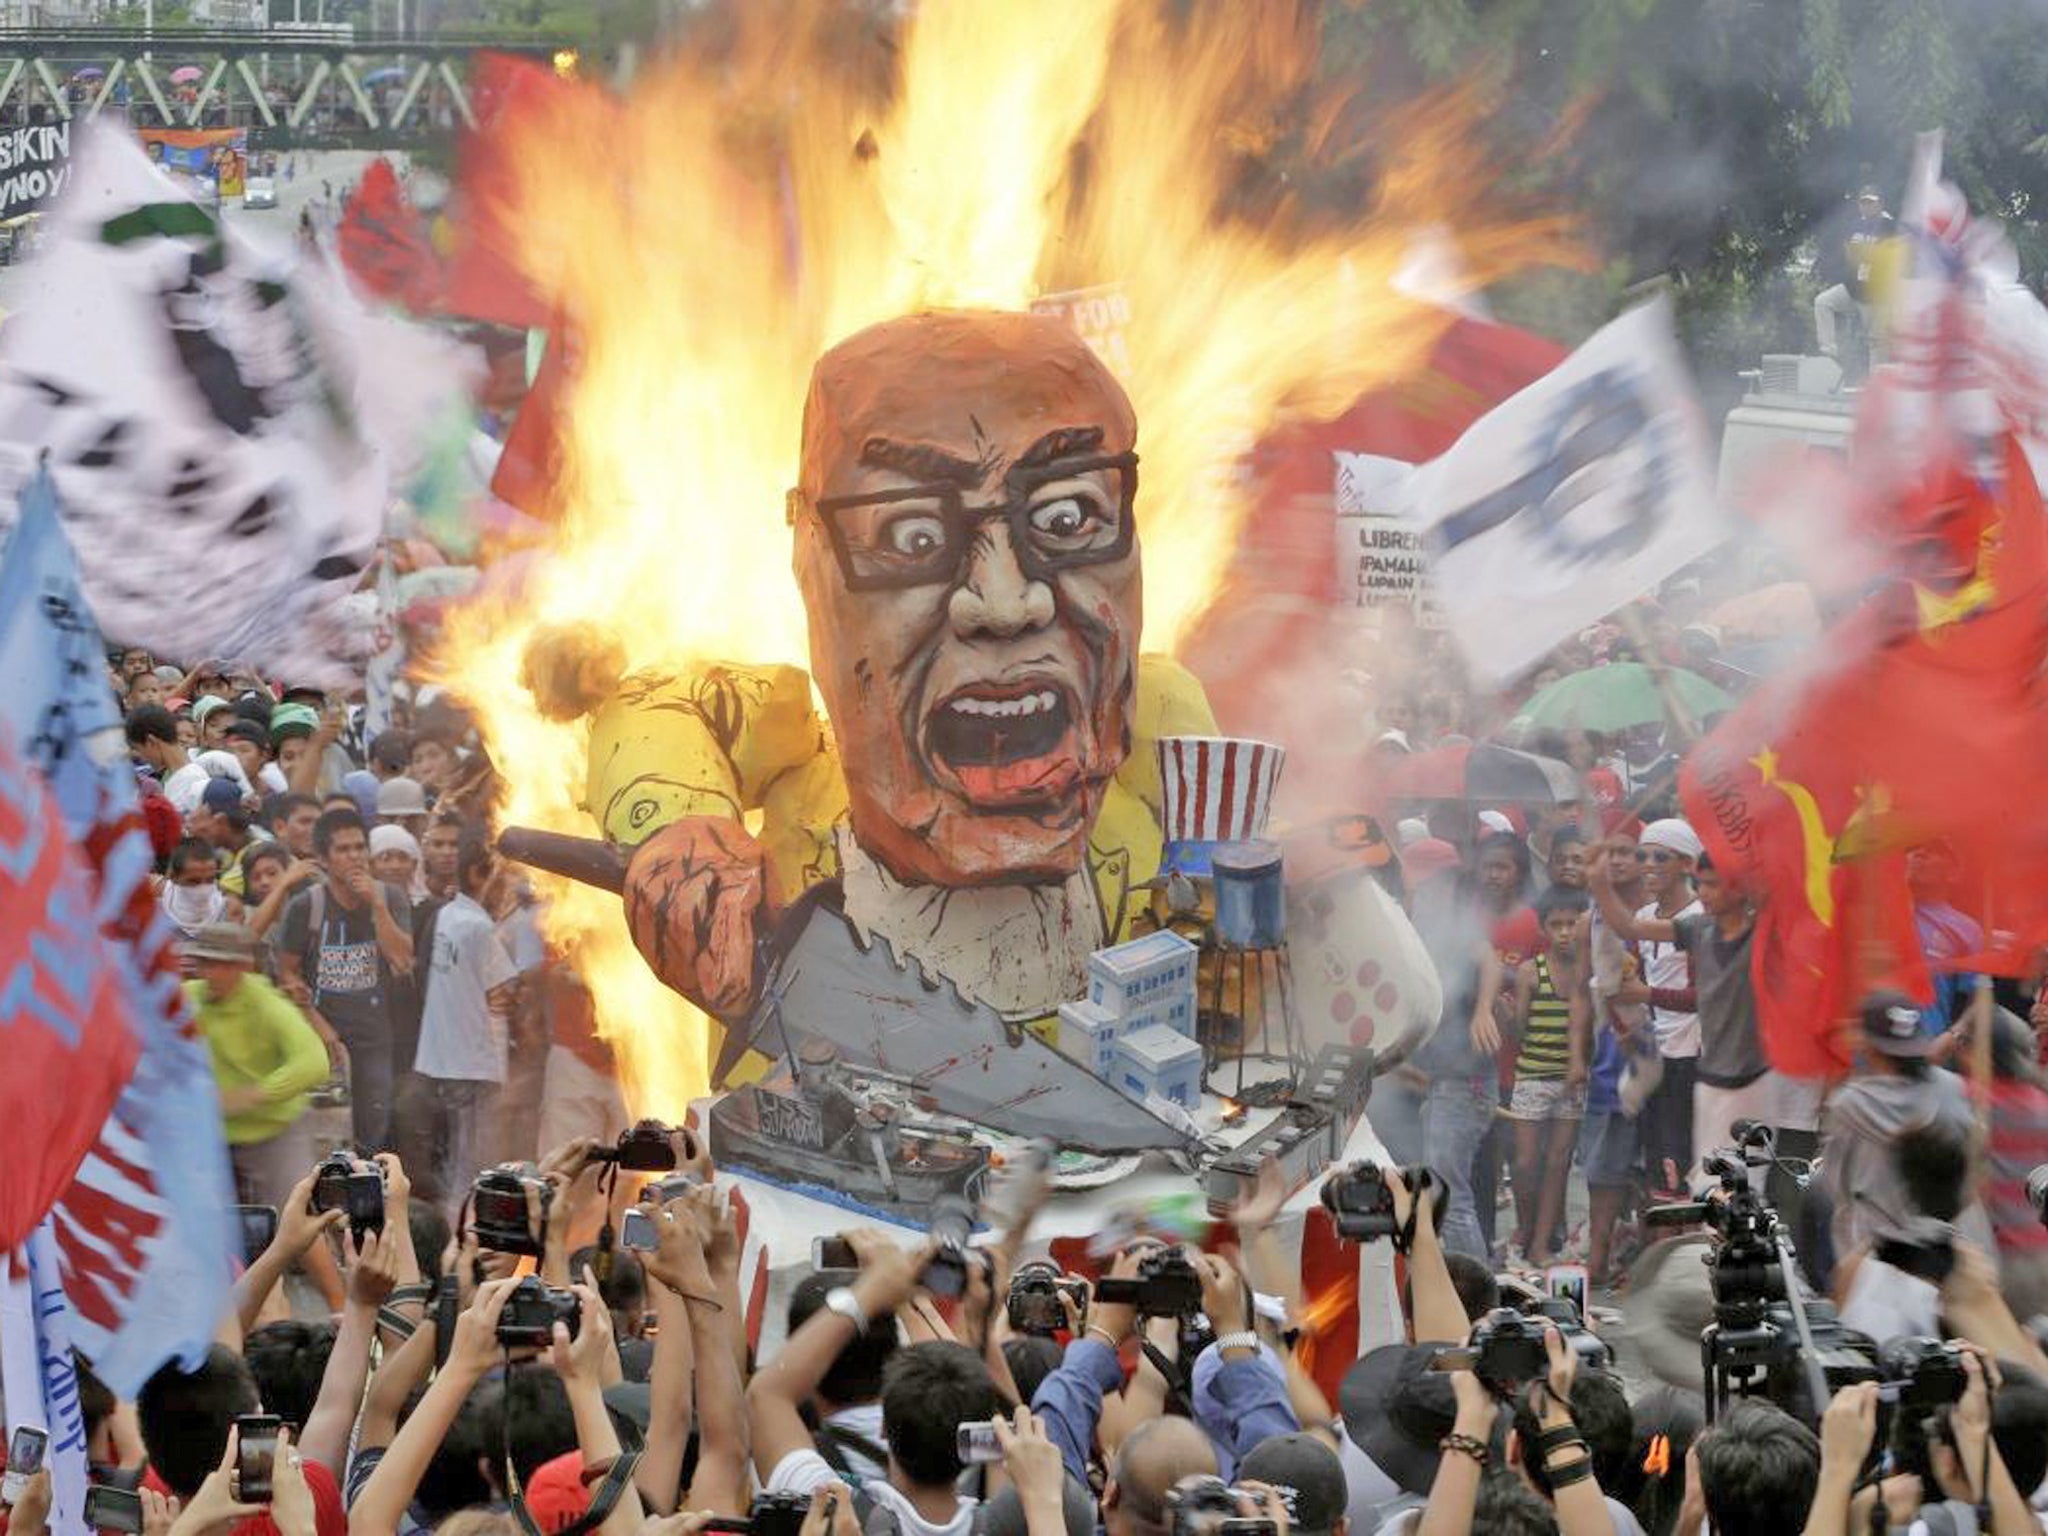 Protesters burn an effigy of the Philippine President Benigno Aquino III during
a rally in Quezon, northeast of Manila